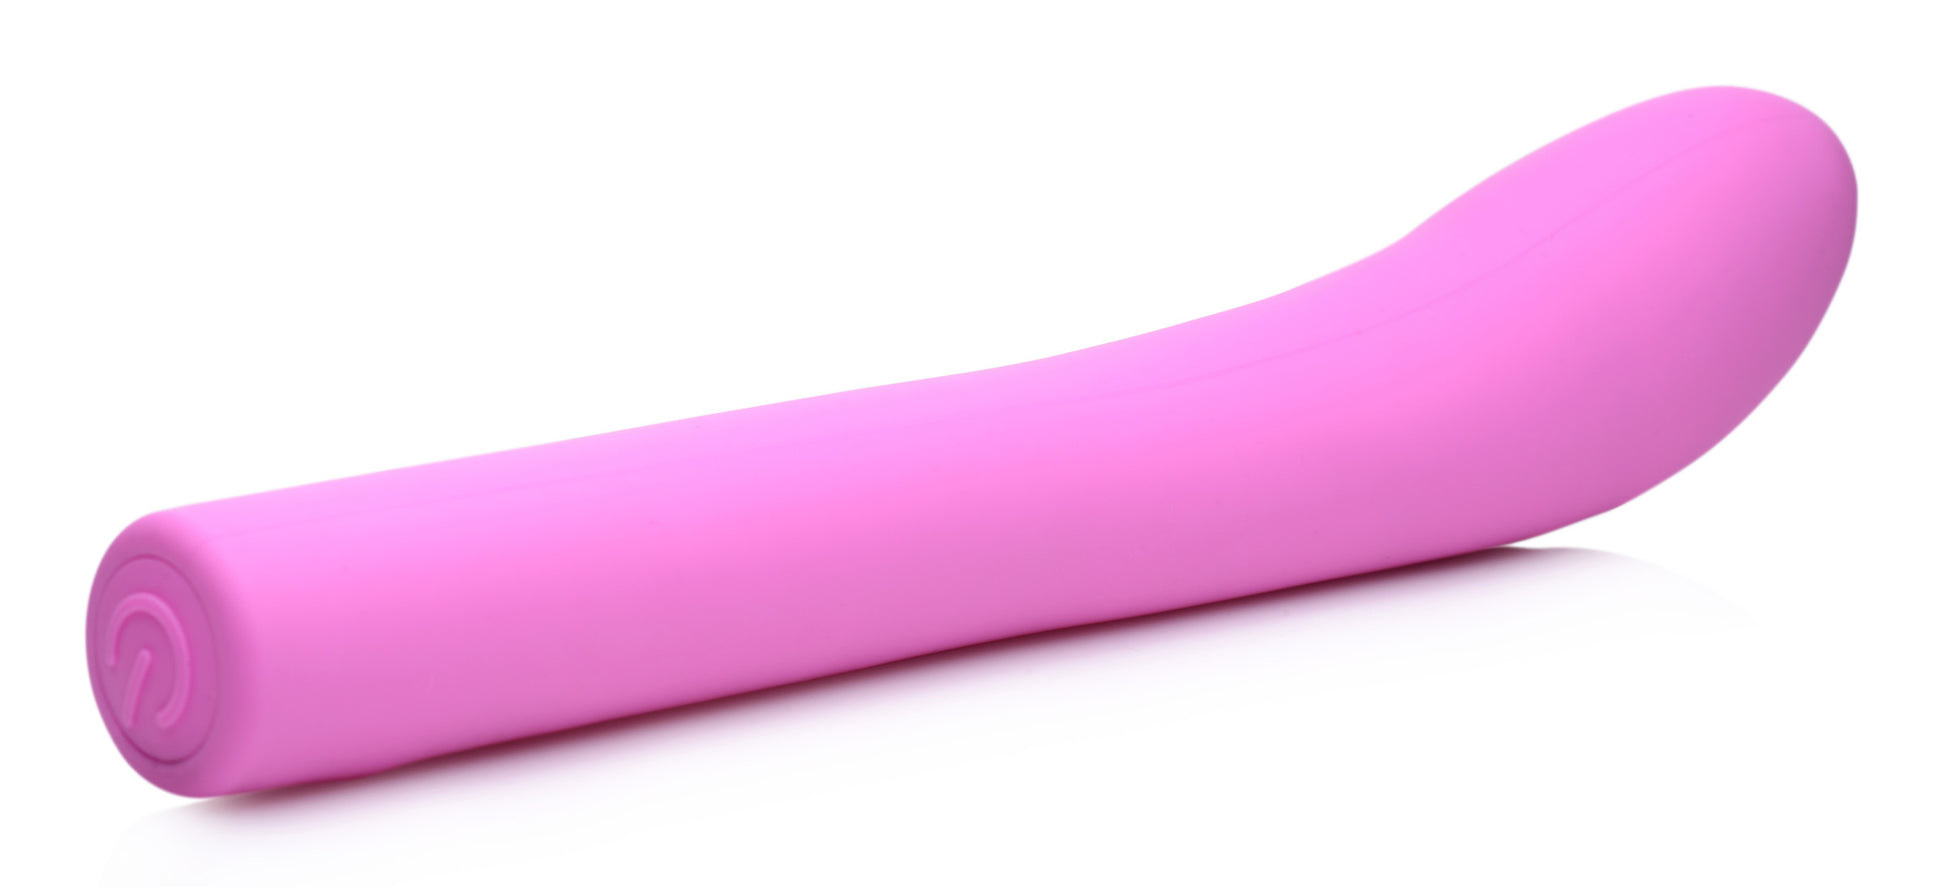 5 Star 9X Come-Hither G-Spot Silicone Vibrator - Pink - UABDSM